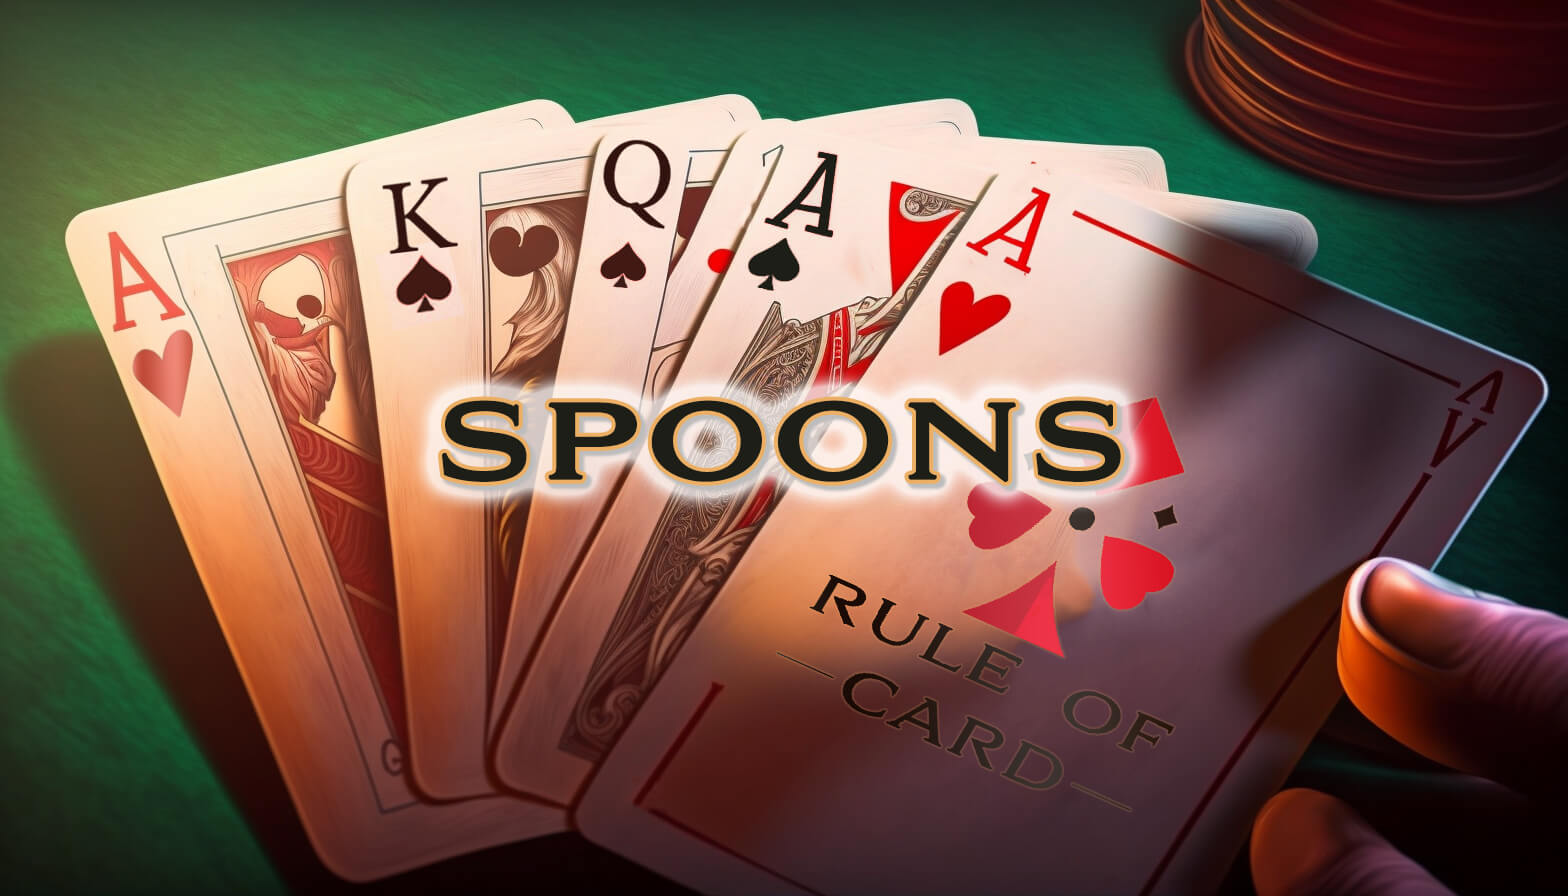 Playing the card game Spoons